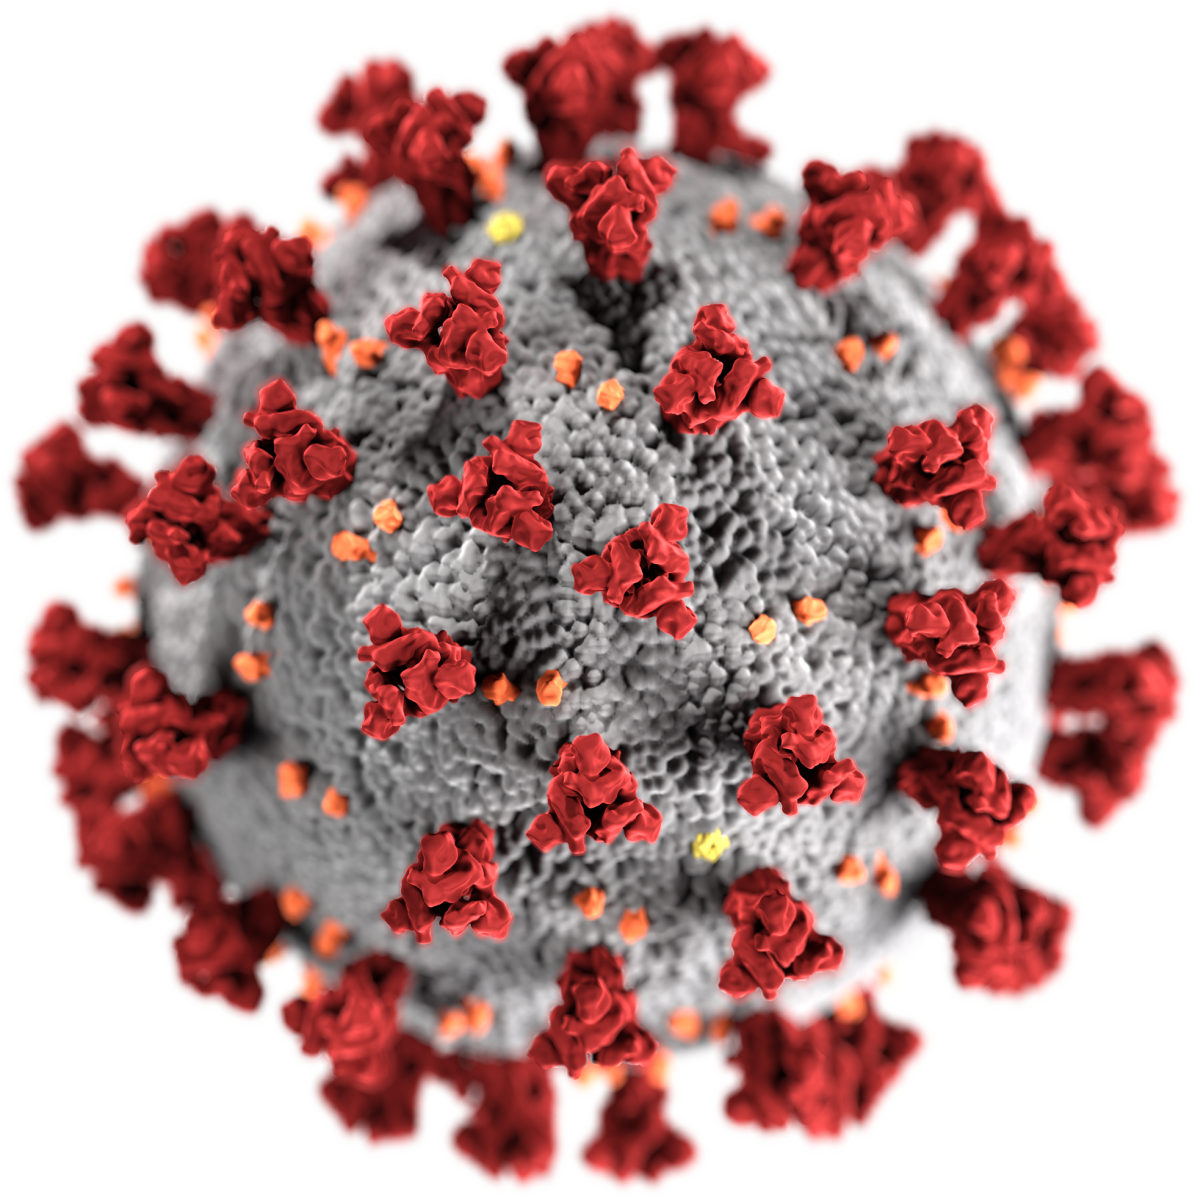 A depiction of the SARS-CoV-2 virus